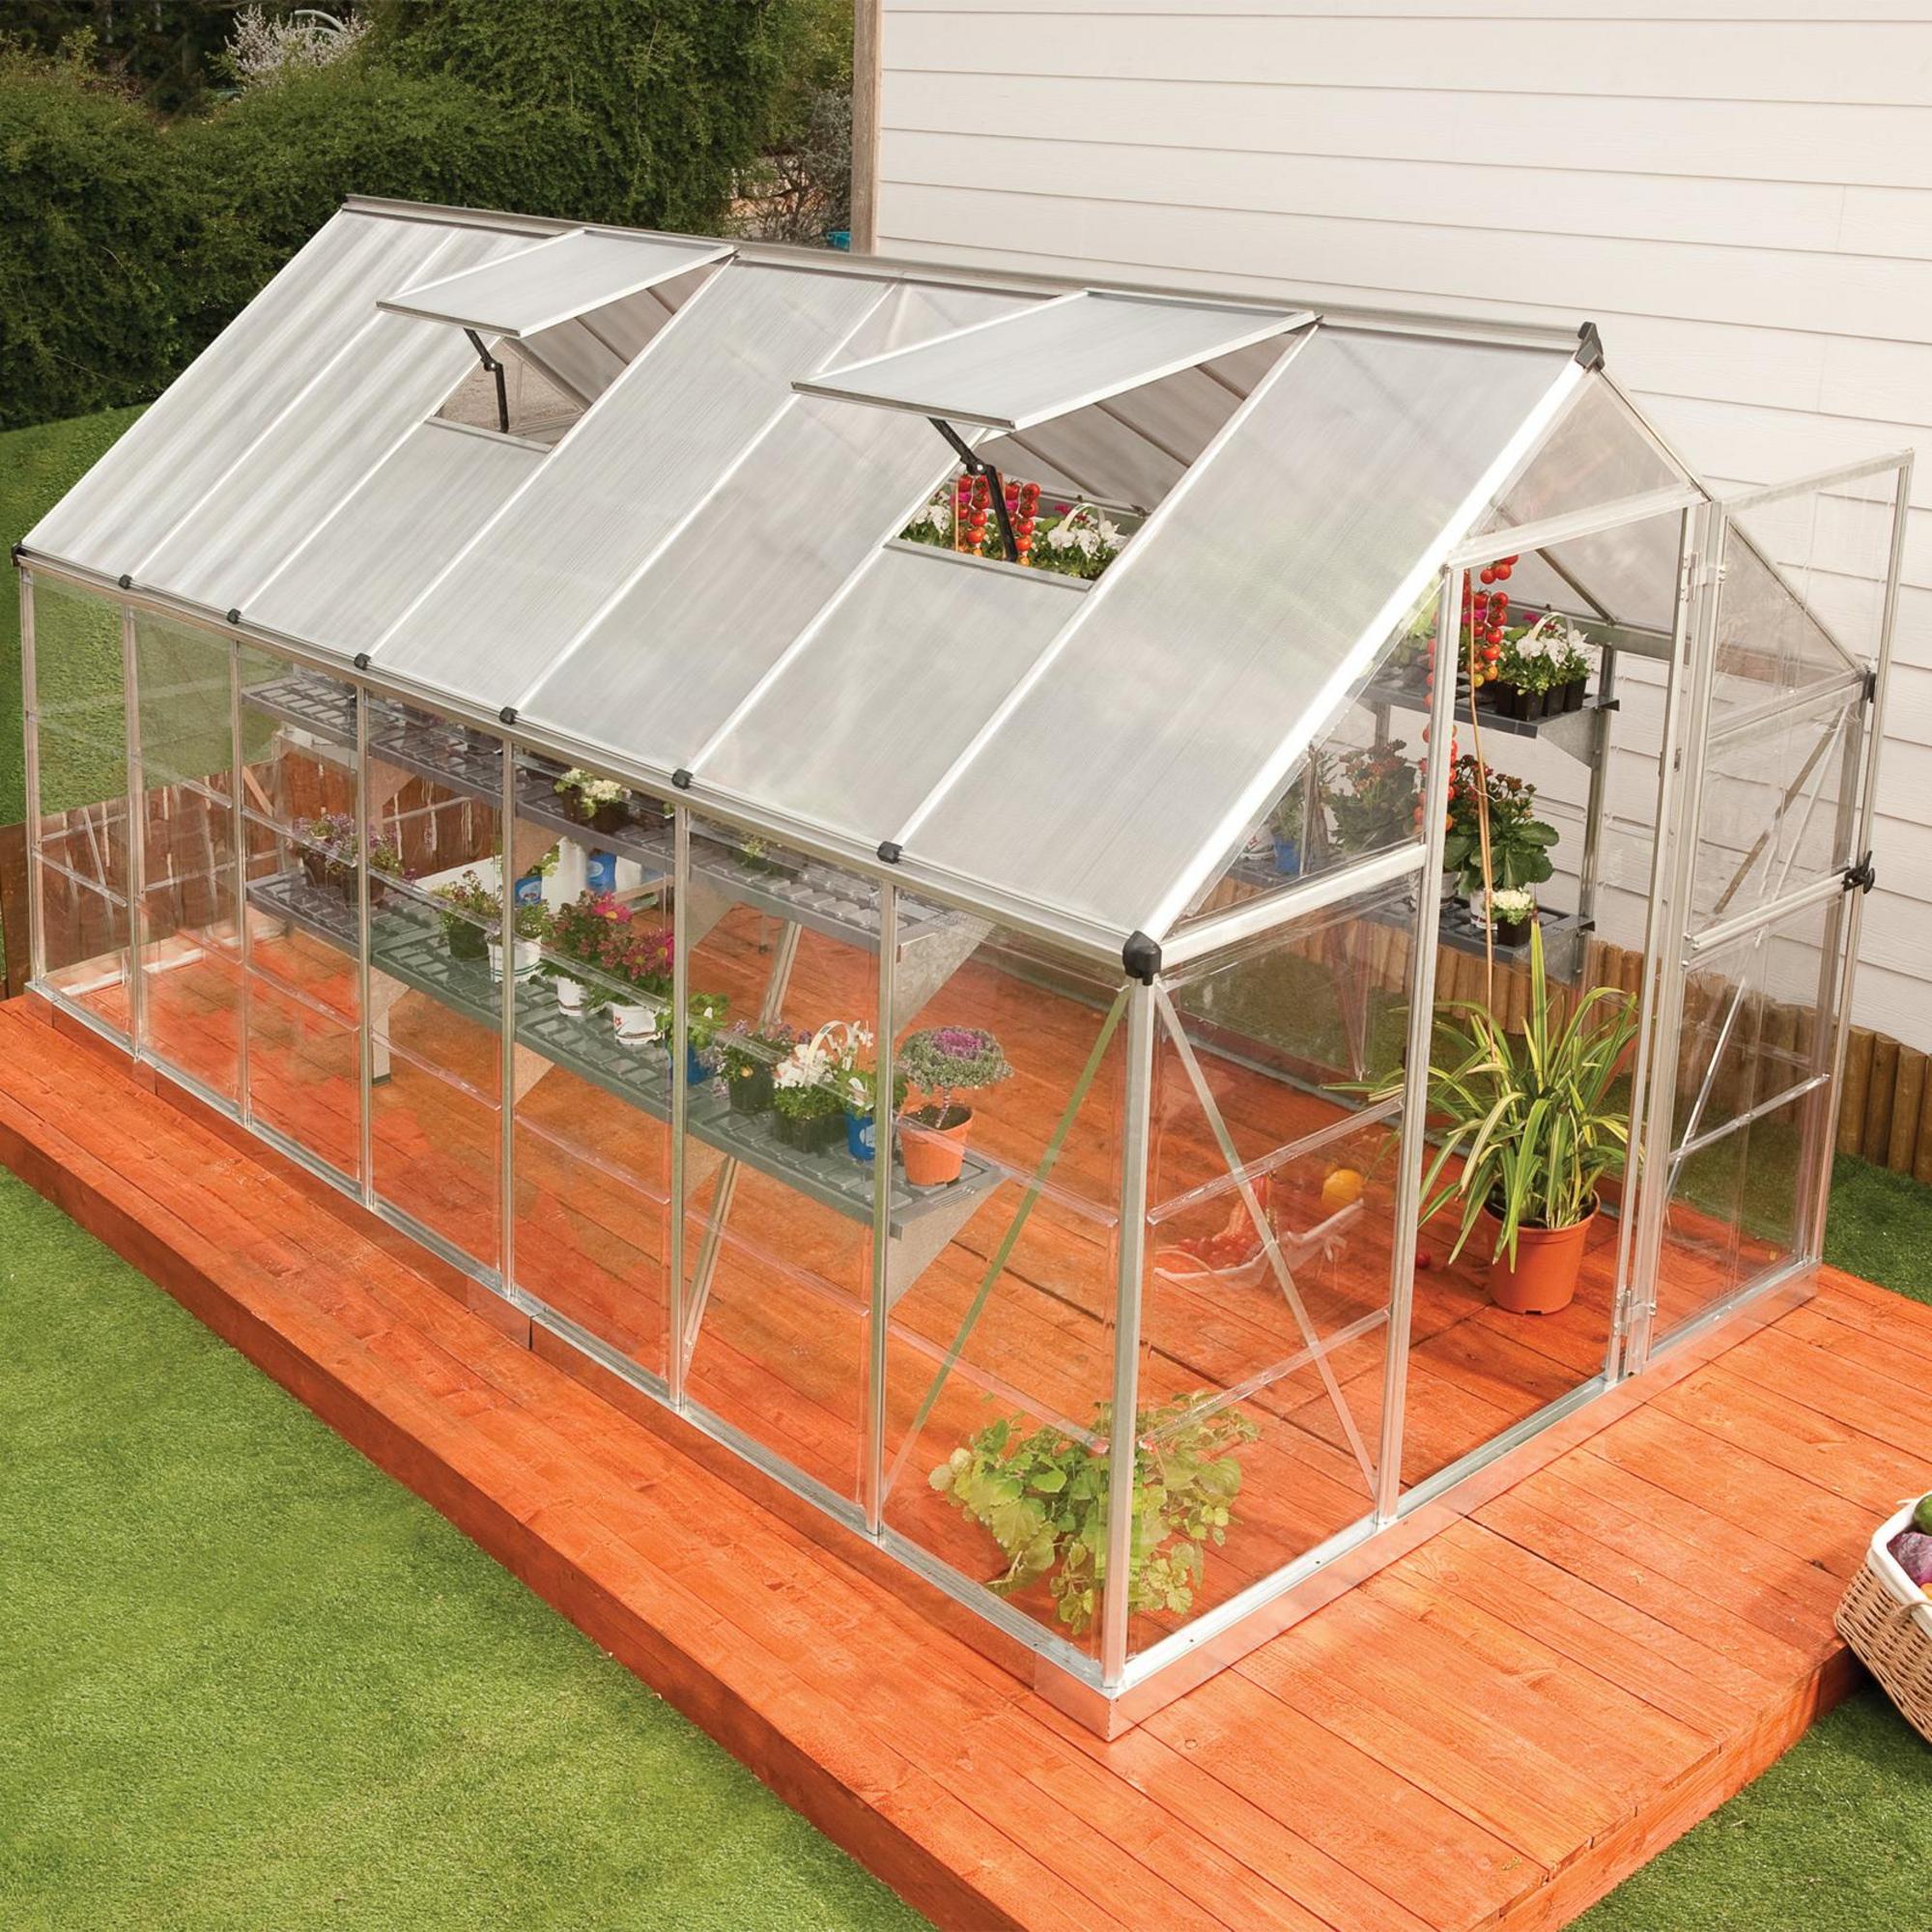 Canopia by Palram 6 x 14 Hybrid Greenhouse Silver